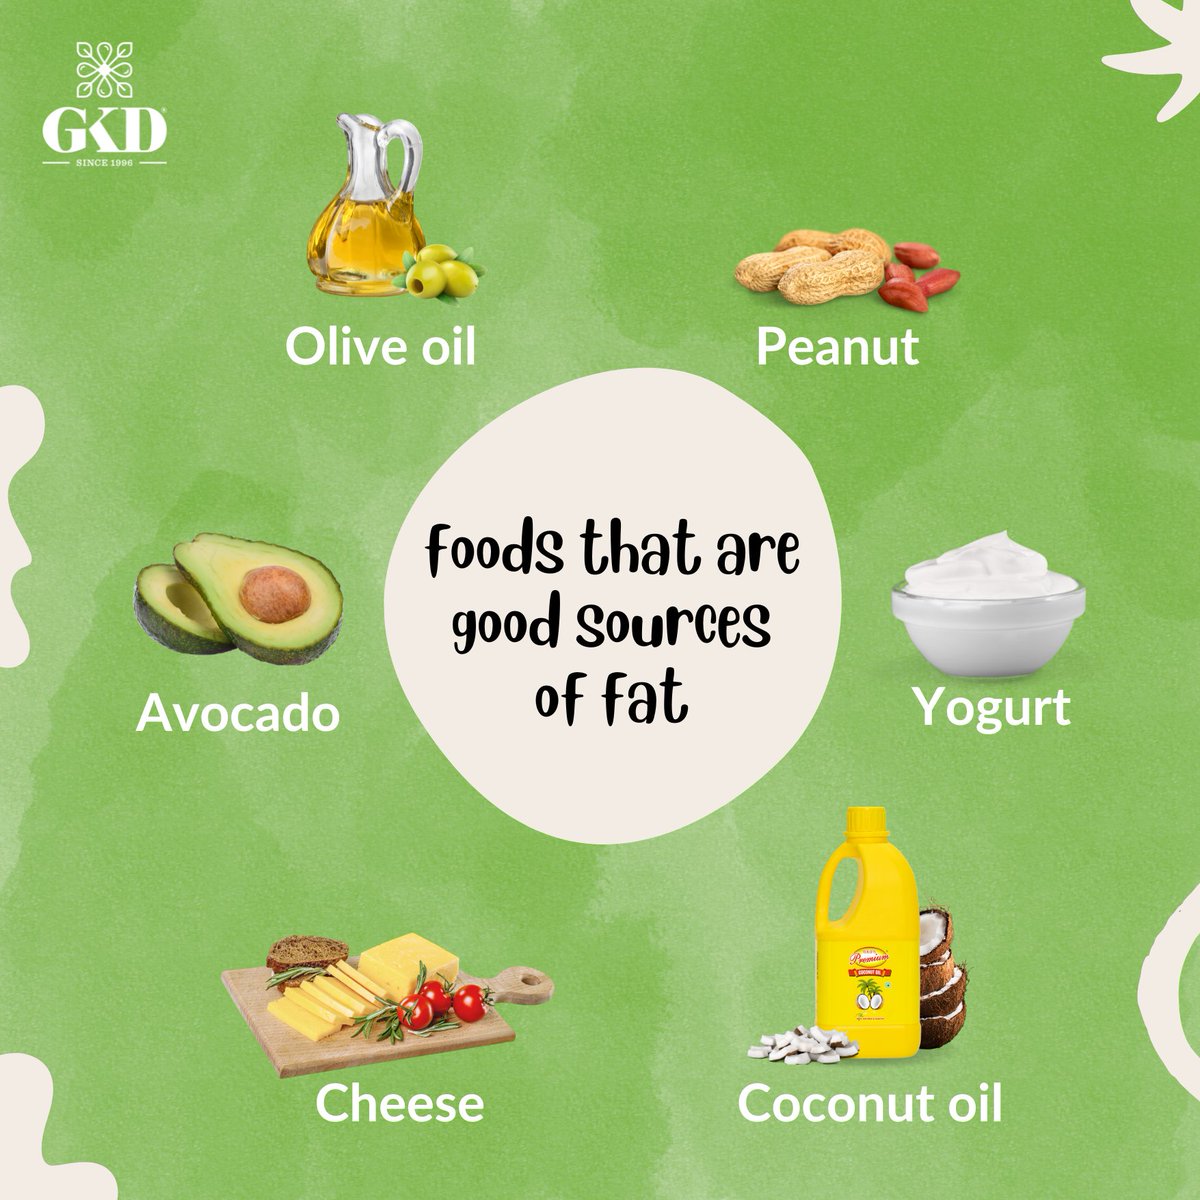 Know and include healthy sources of fat in your diet - fuel your body right.

.
#tropicalflavors #healthycooking #coconutoil #healthylifestyle #wellnessjourney #cookingoil #GKD  #cookingoil #GKDPremiumCoconutOil